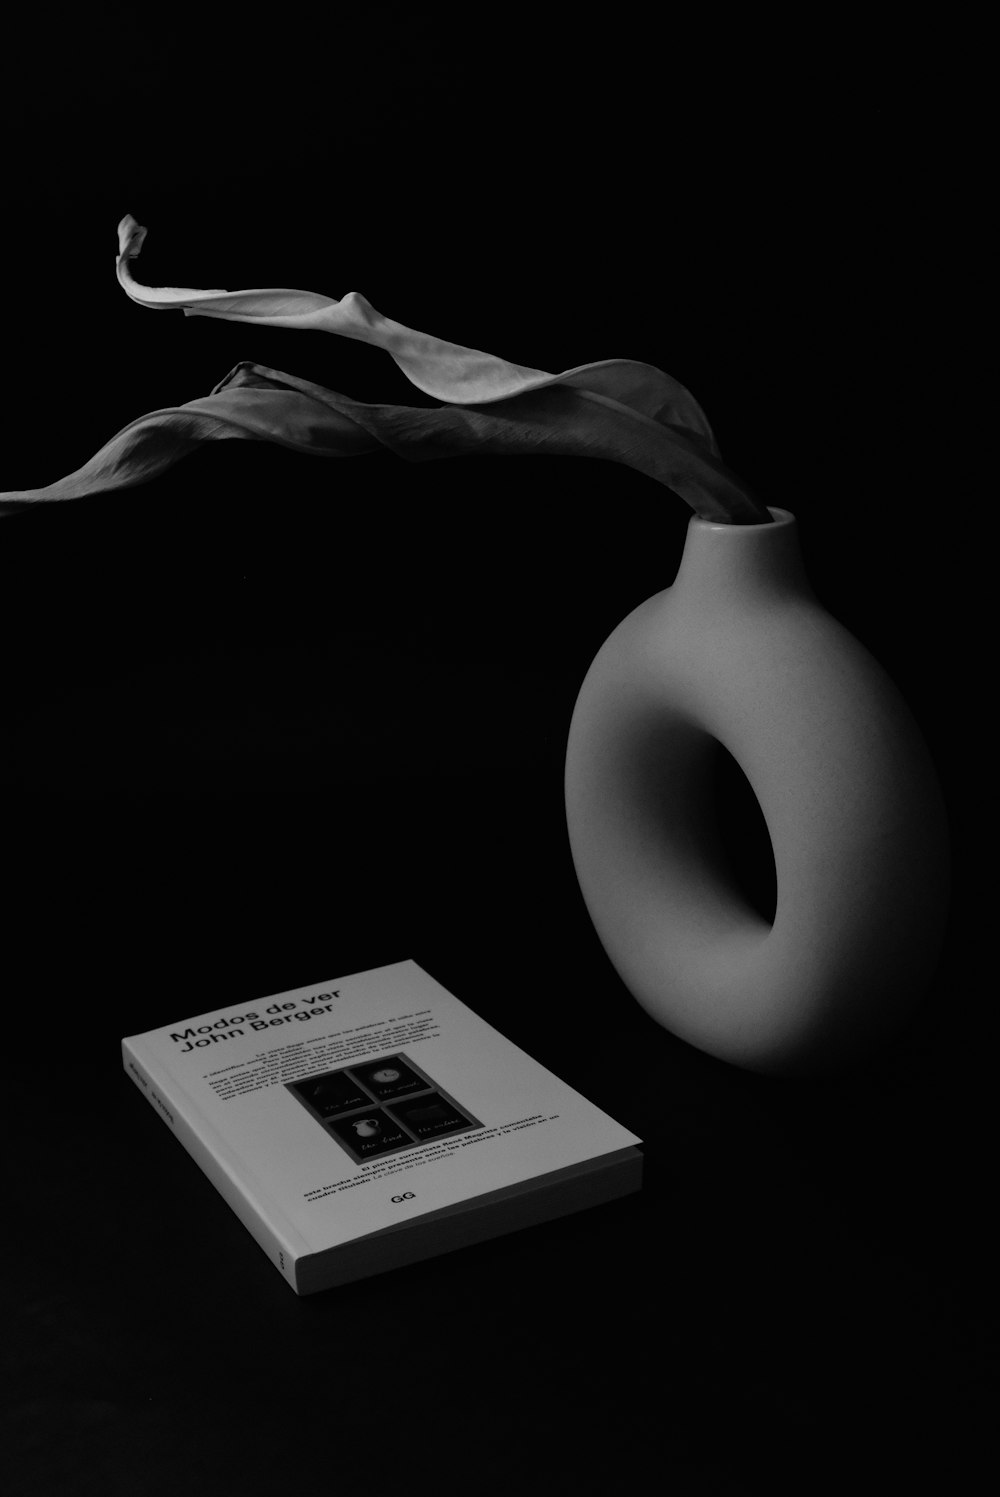 a black and white photo of a book and a vase